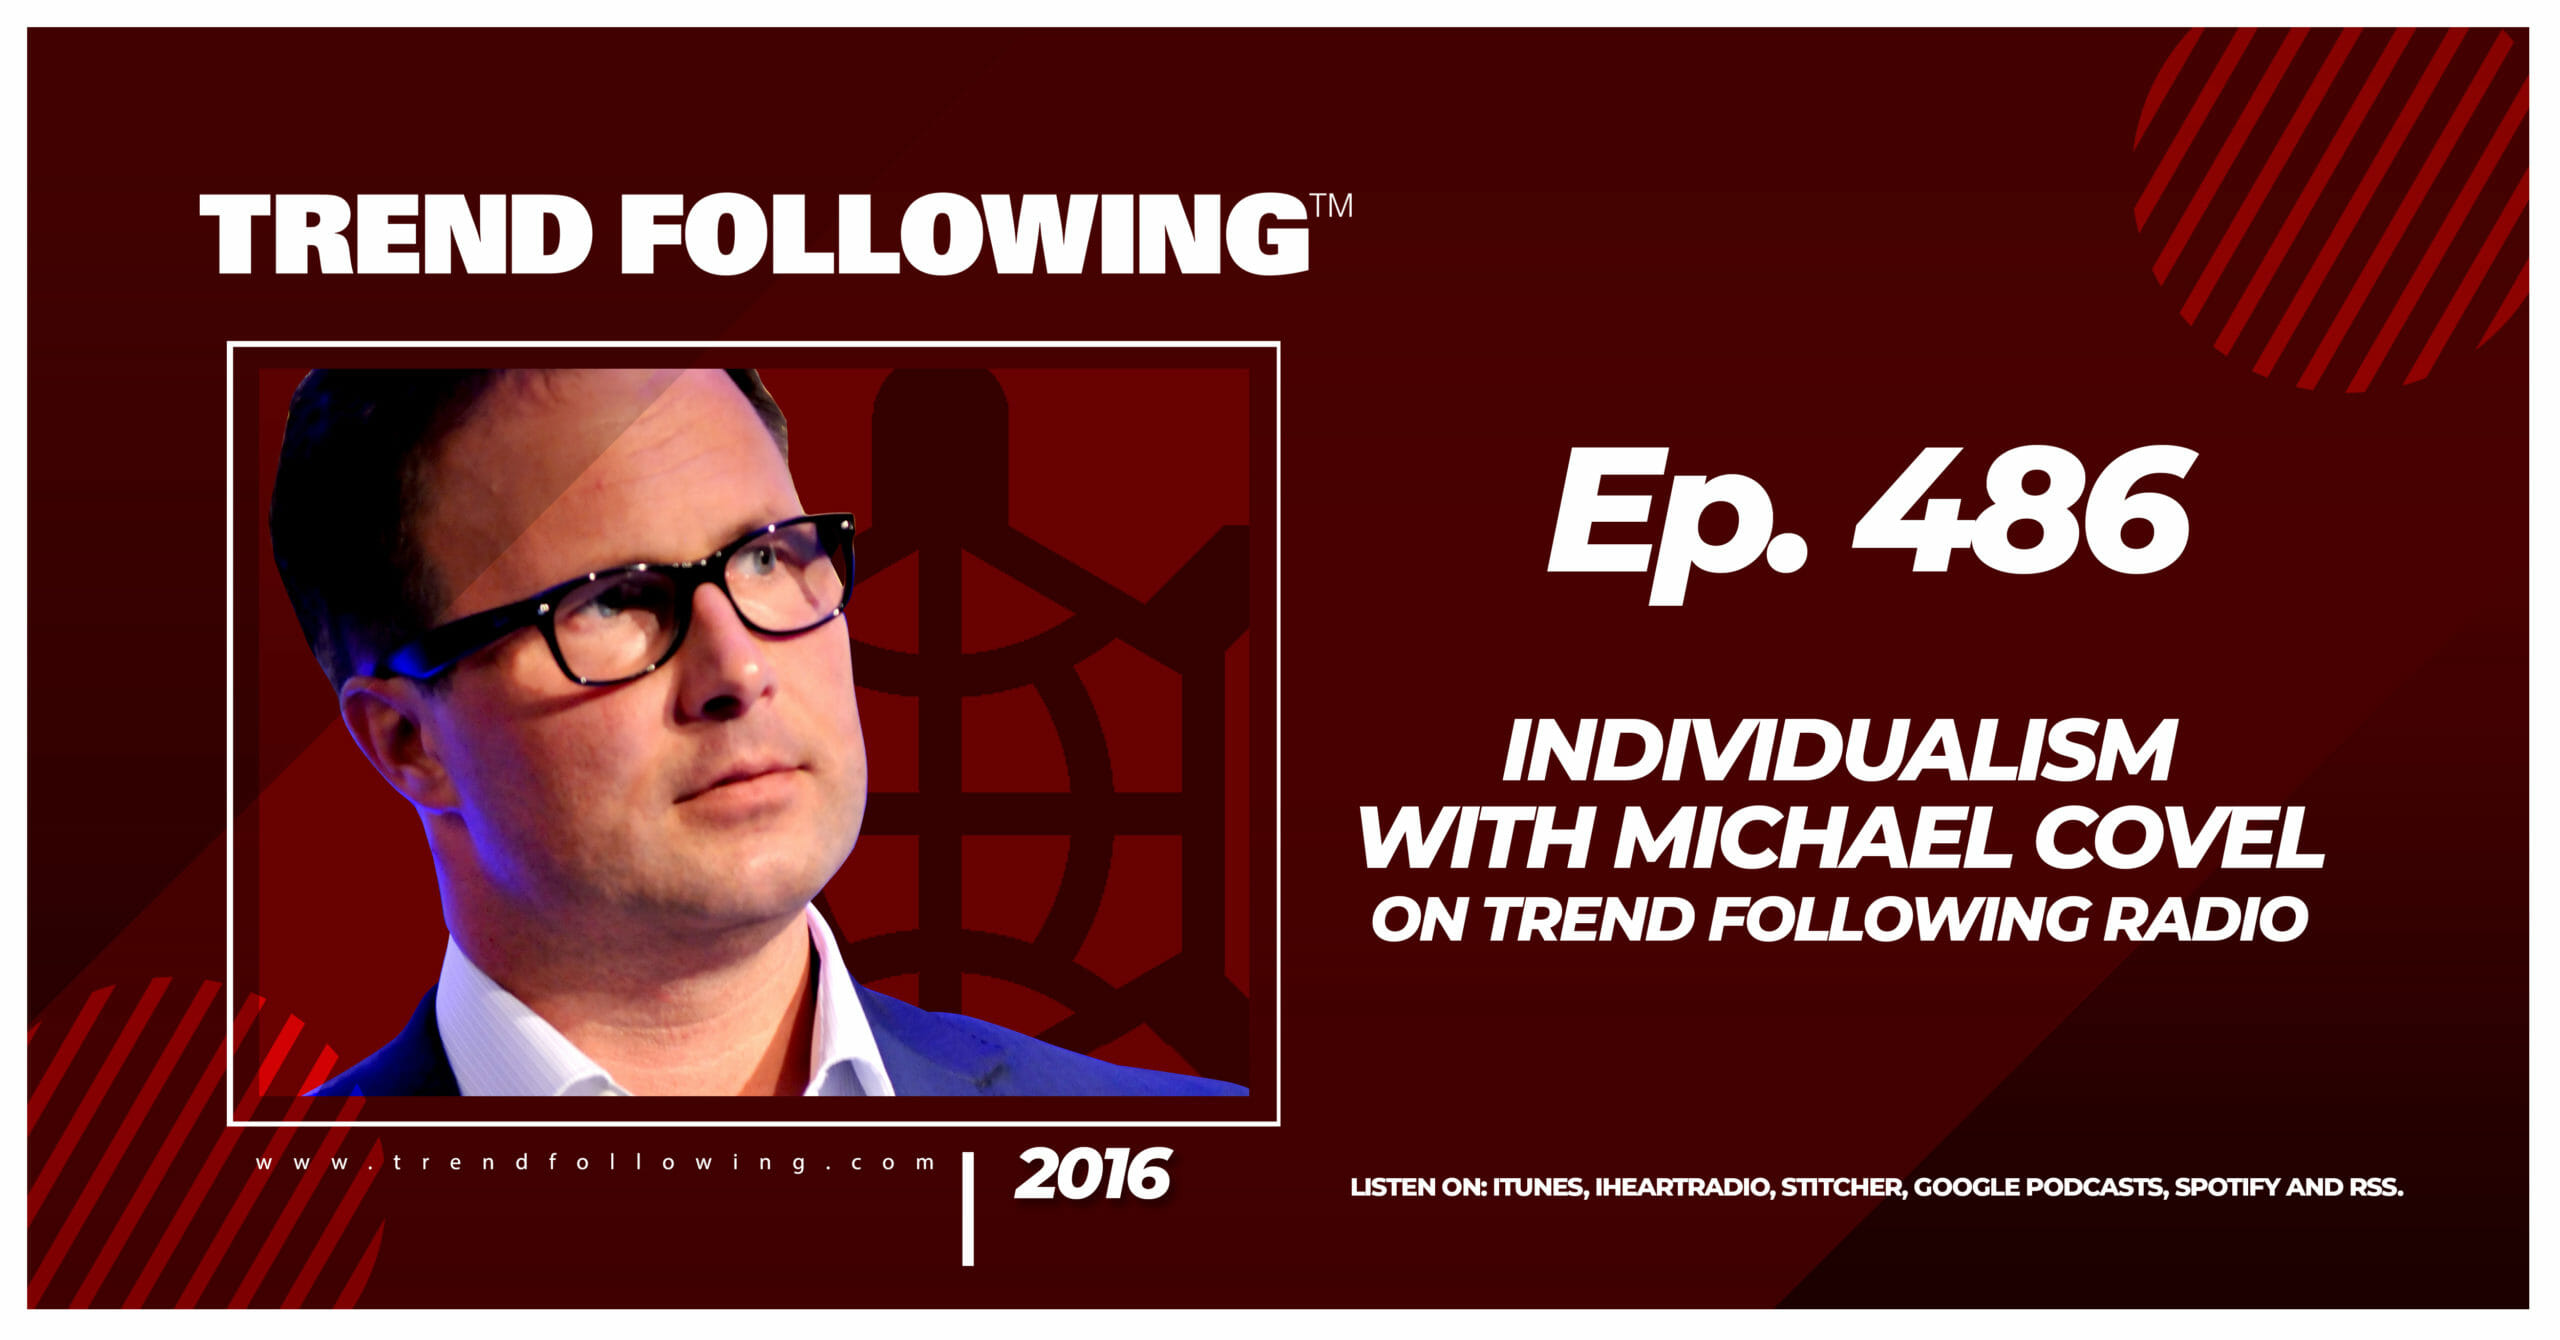 Individualism with Michael Covel on Trend Following Radio